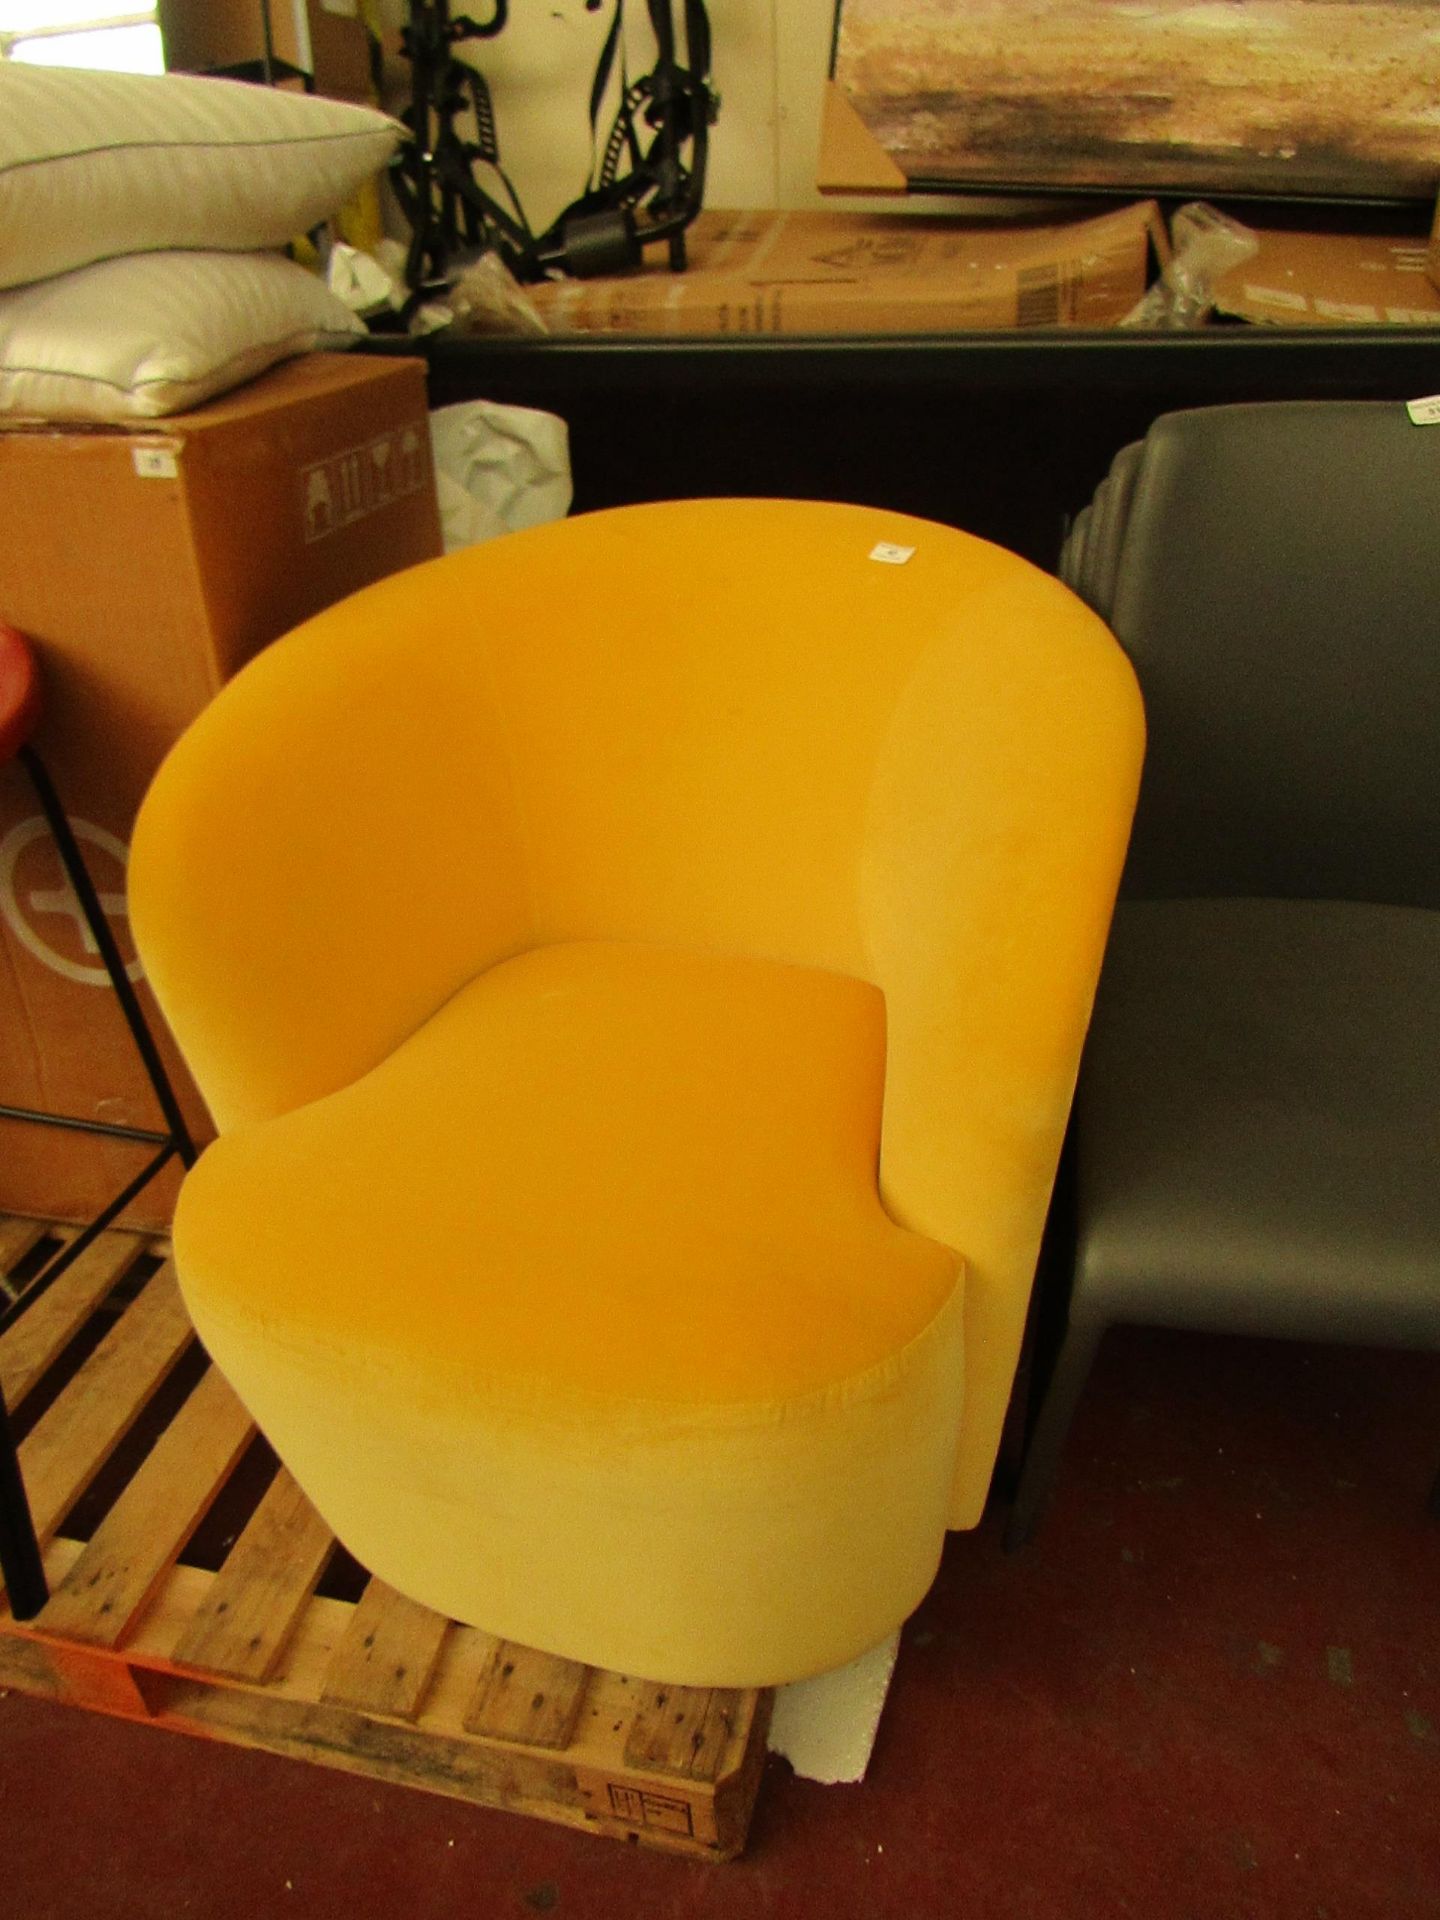 | 1X | SWOON RITZ PRIMROSE VELVET TUB CHAIR | IN GOOD CONDITION BUT APPEARS A BUT FADED ON THE